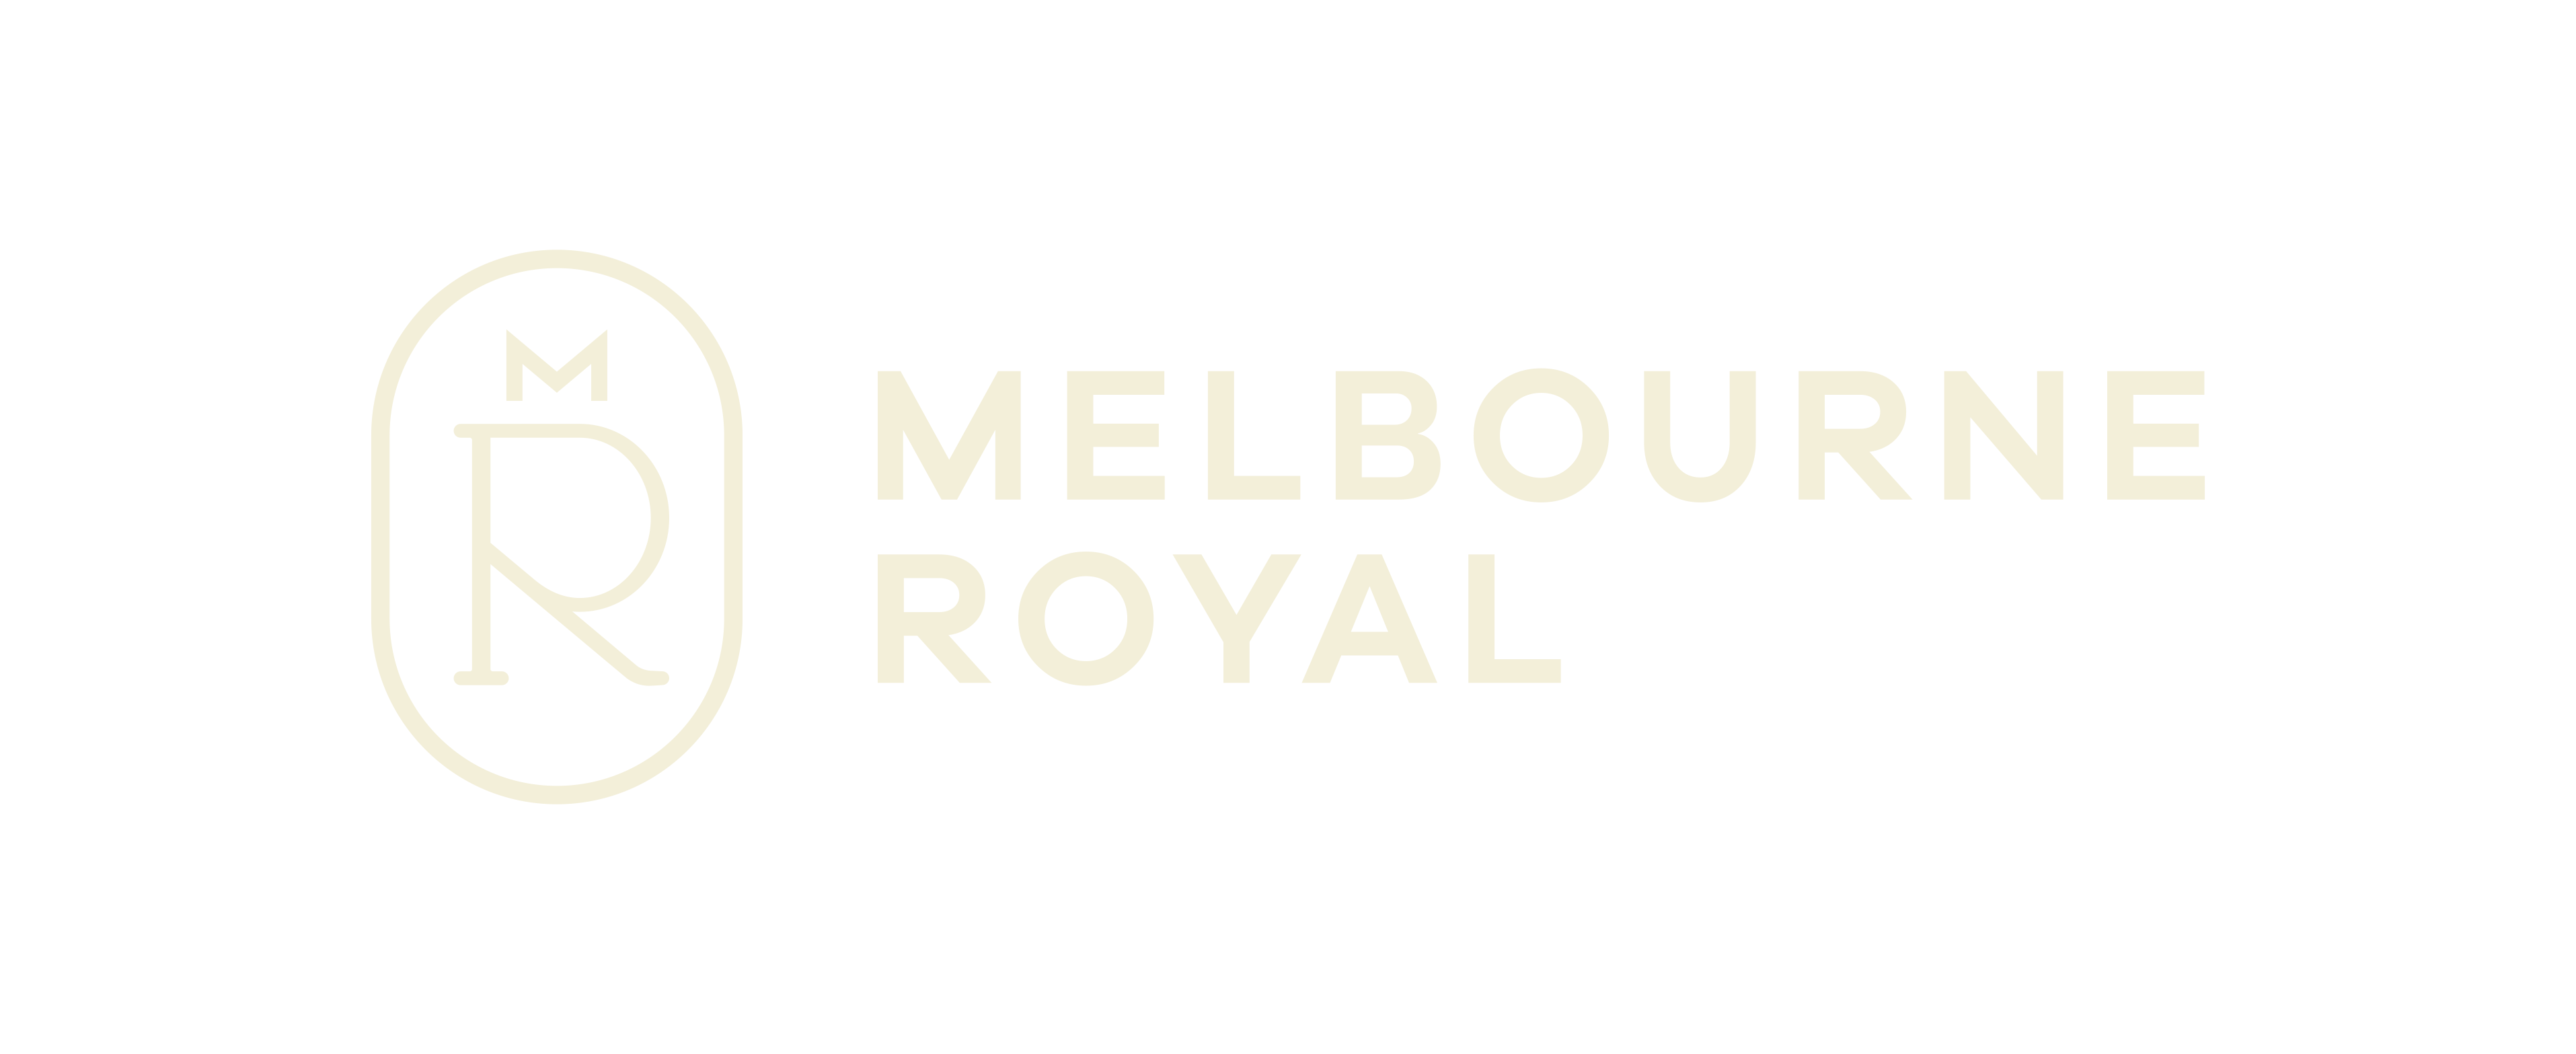 175 Years of Melbourne Royal